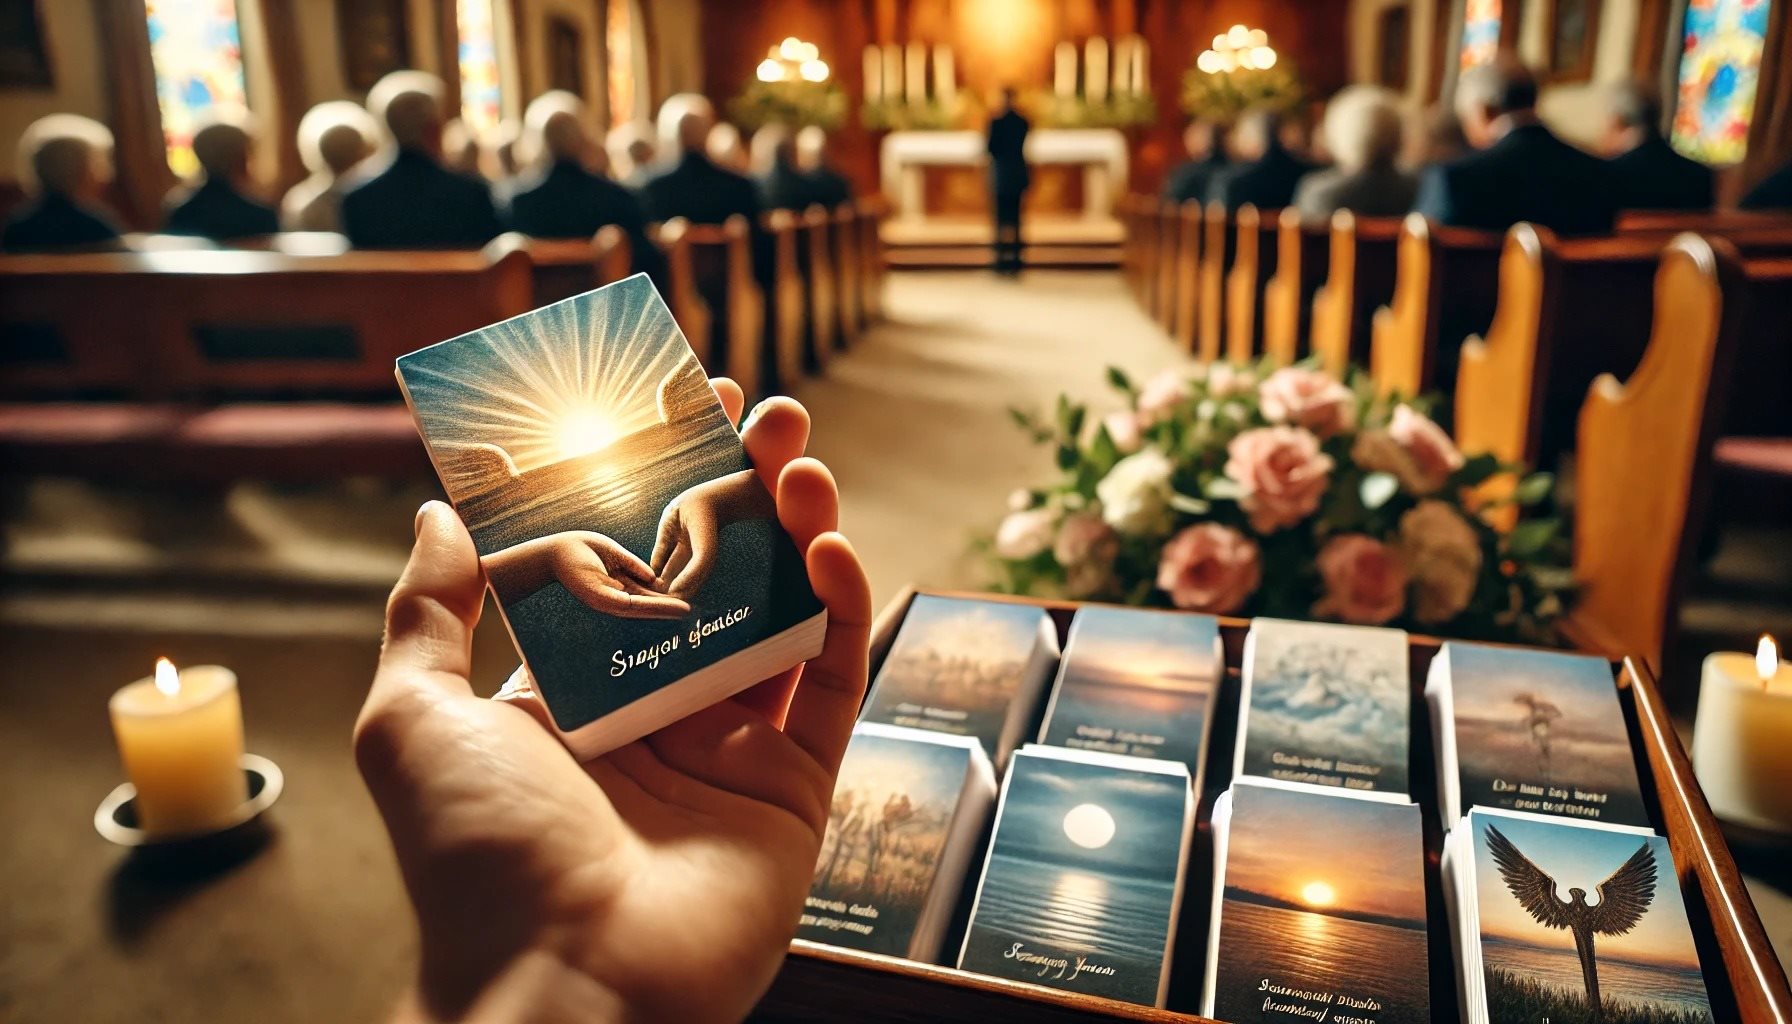 15 Prayer Cards For Funeral Services